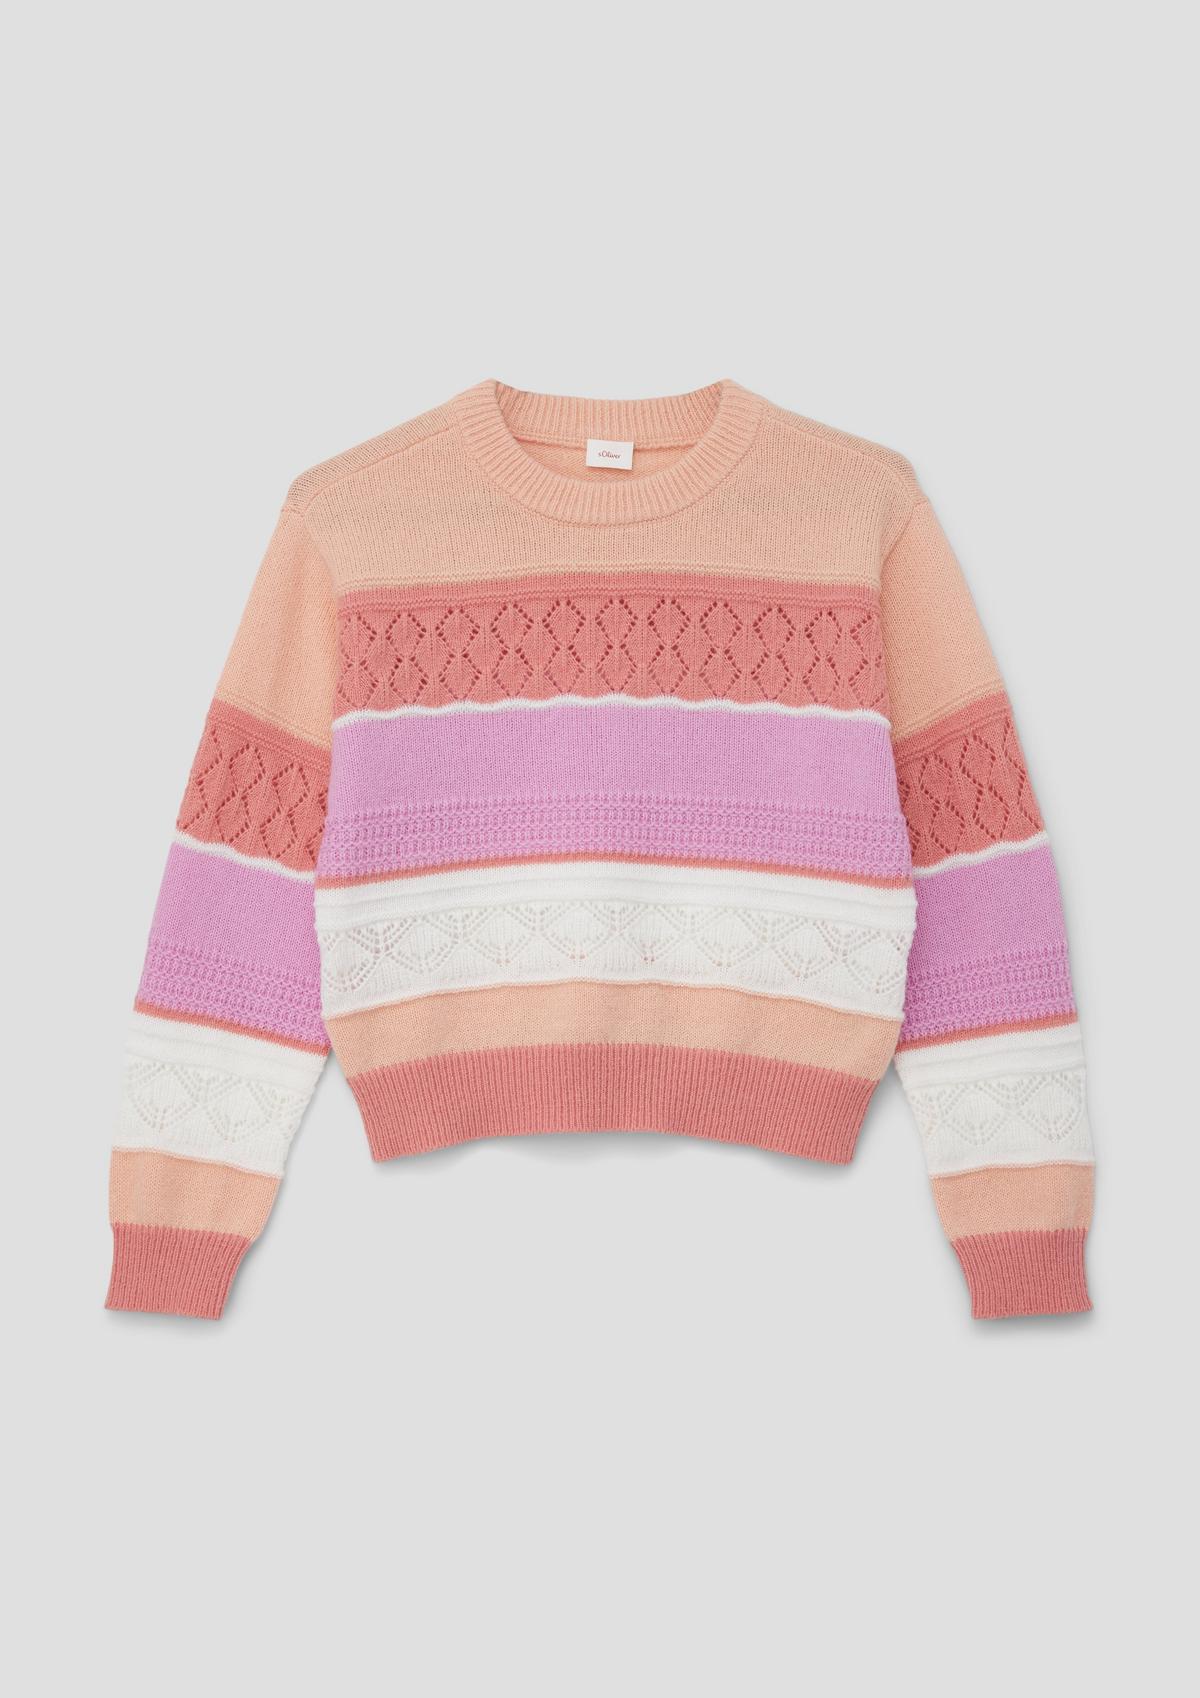 teens and girls Sweatshirts knitwear and for